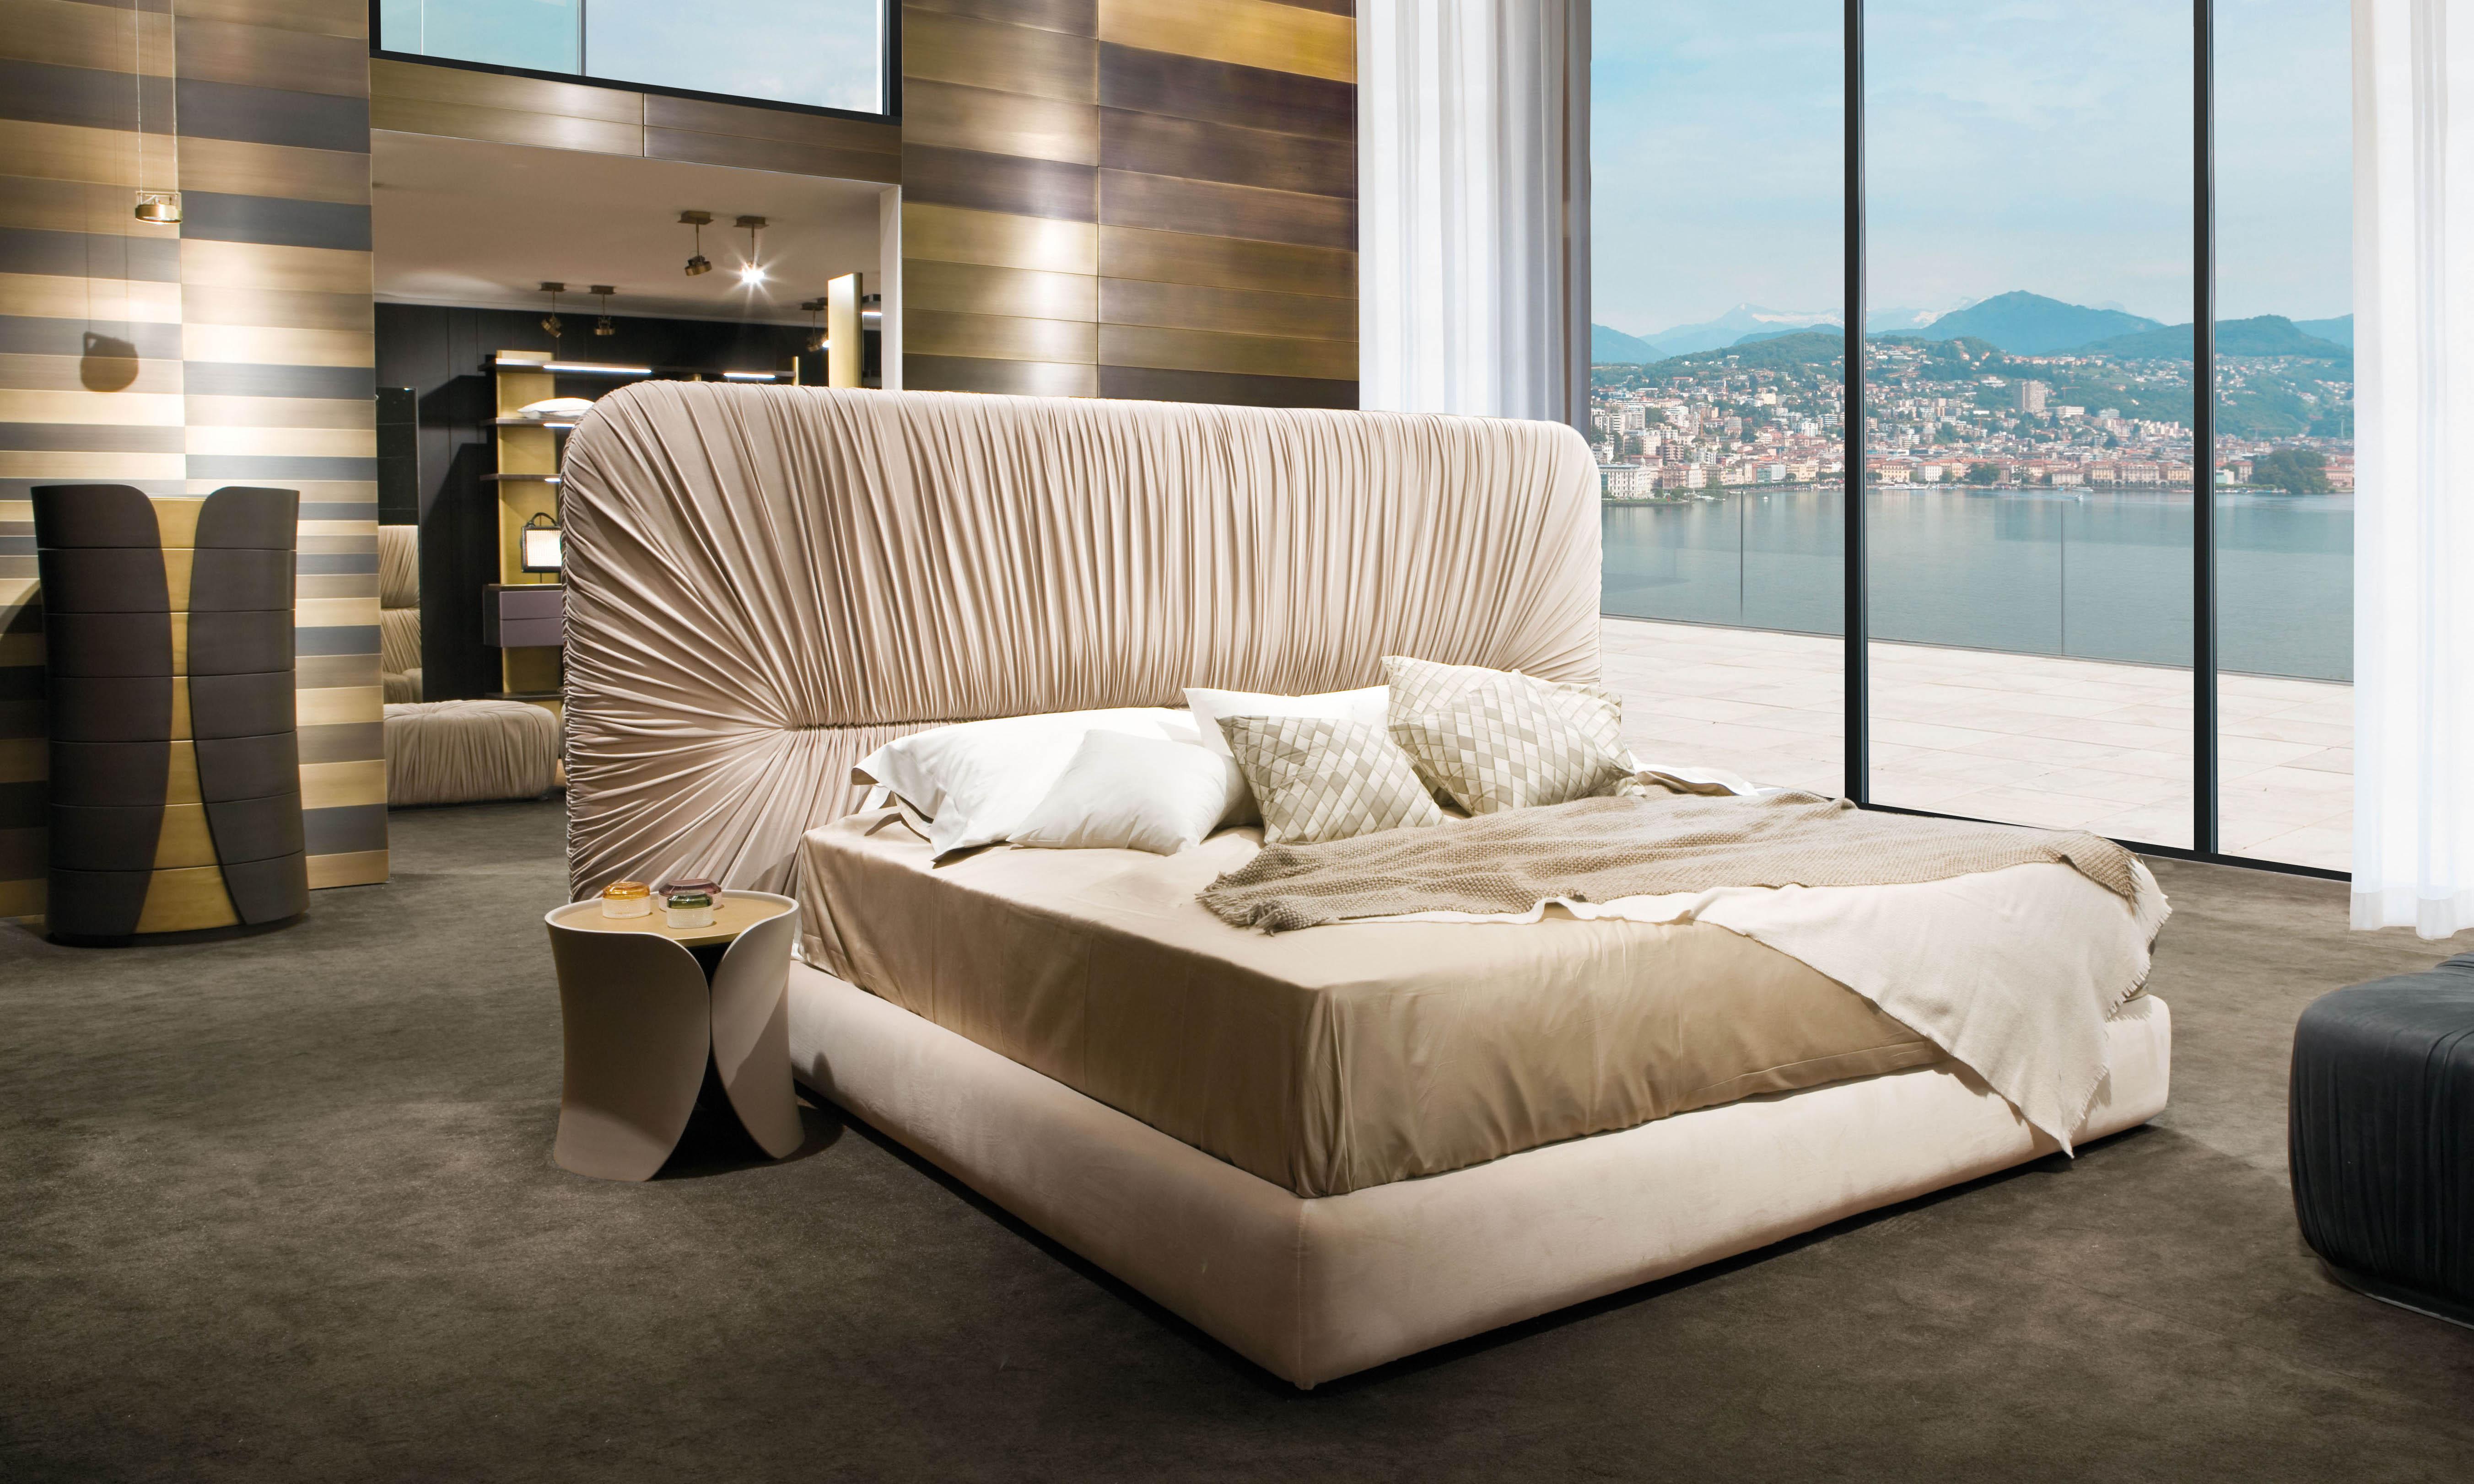 Laurameroni luxury modern draped furniture in velvet or leather for a made to measure interior design